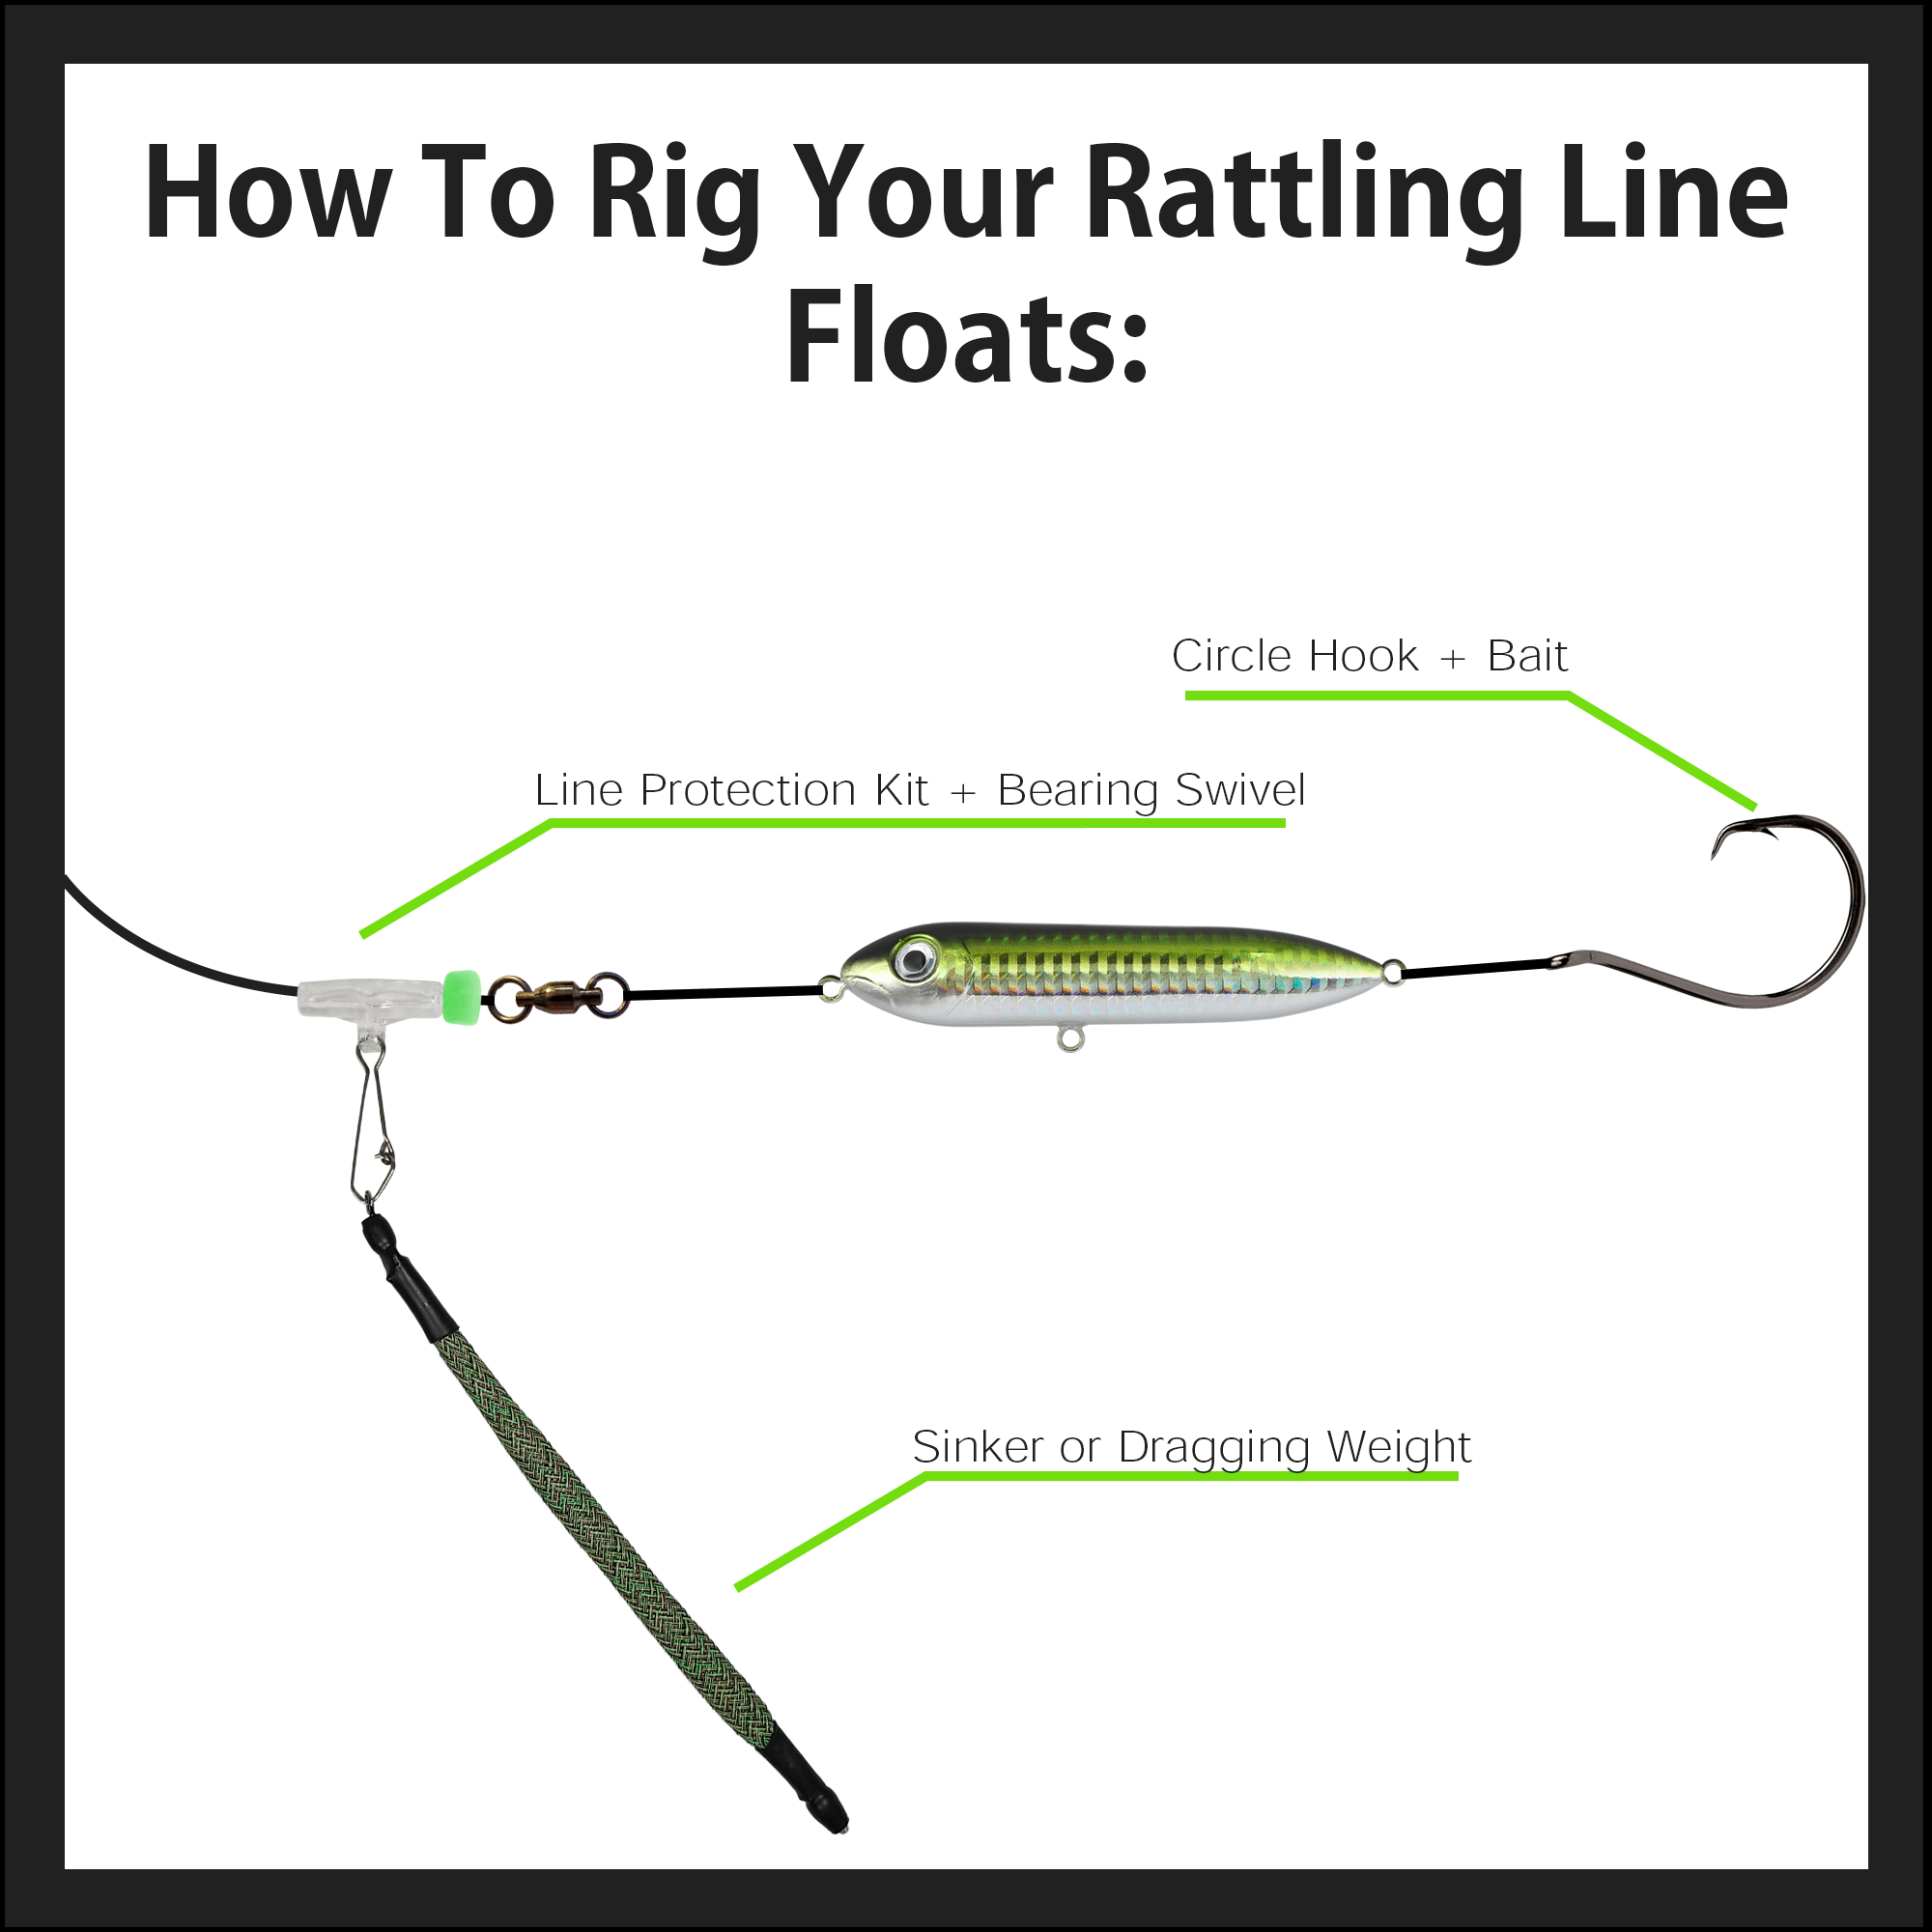 Catfish Sumo Catfish Rattling Line Float Lure for Catfishing, Demon Dragon Style Peg for Santee Rig Fishing, 4 inch (3-Pack, Threadfin Shad)